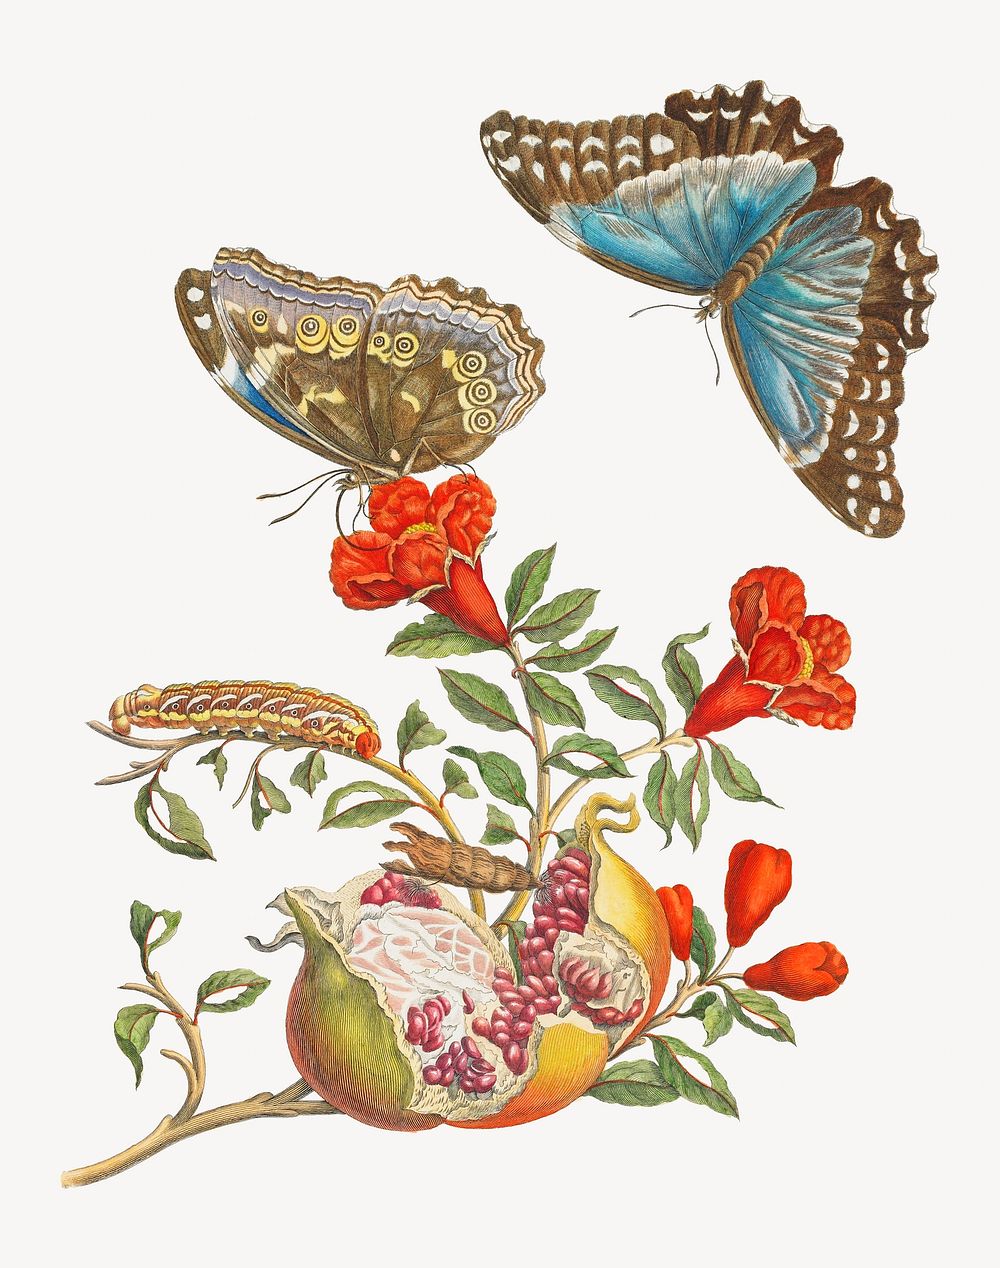 Blue Butterflies and Pomegranate, vintage botanical illustration by Maria Sibylla Merian. Remixed by rawpixel.